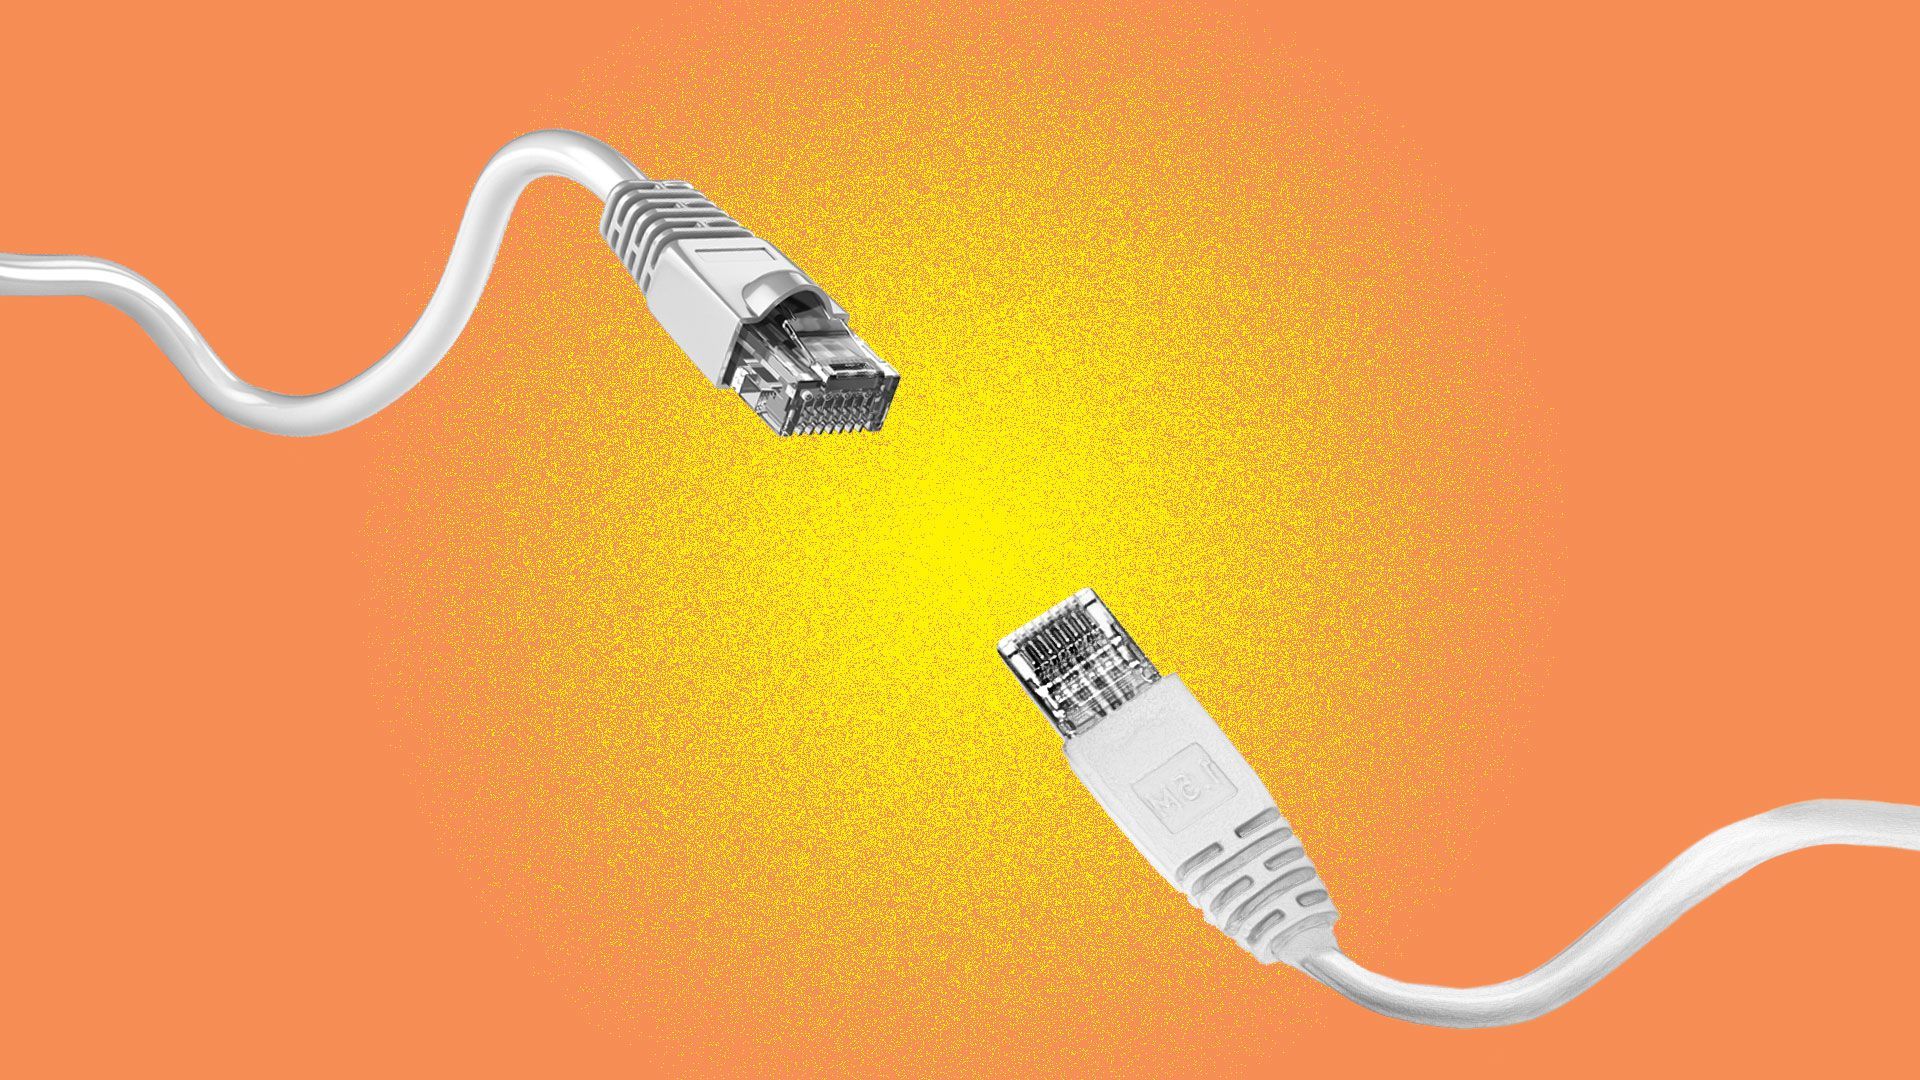 Illustration of two ethernet cables.